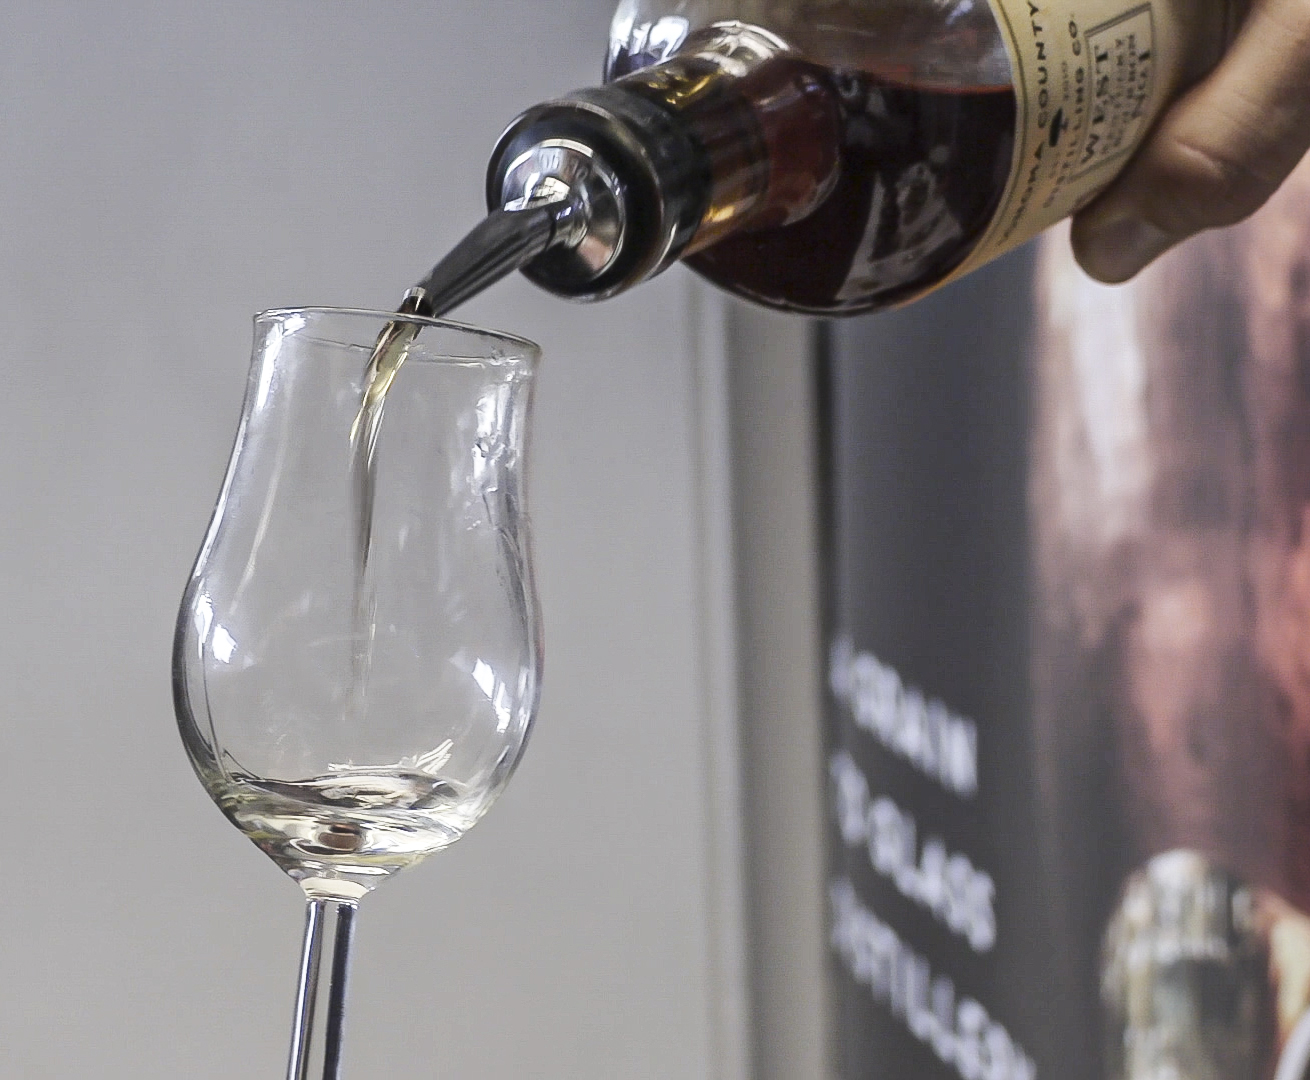 Whisky being poured into a glass during a whisky festival. File photo ©2020, Mark GIllespie/CaskStrength Media.